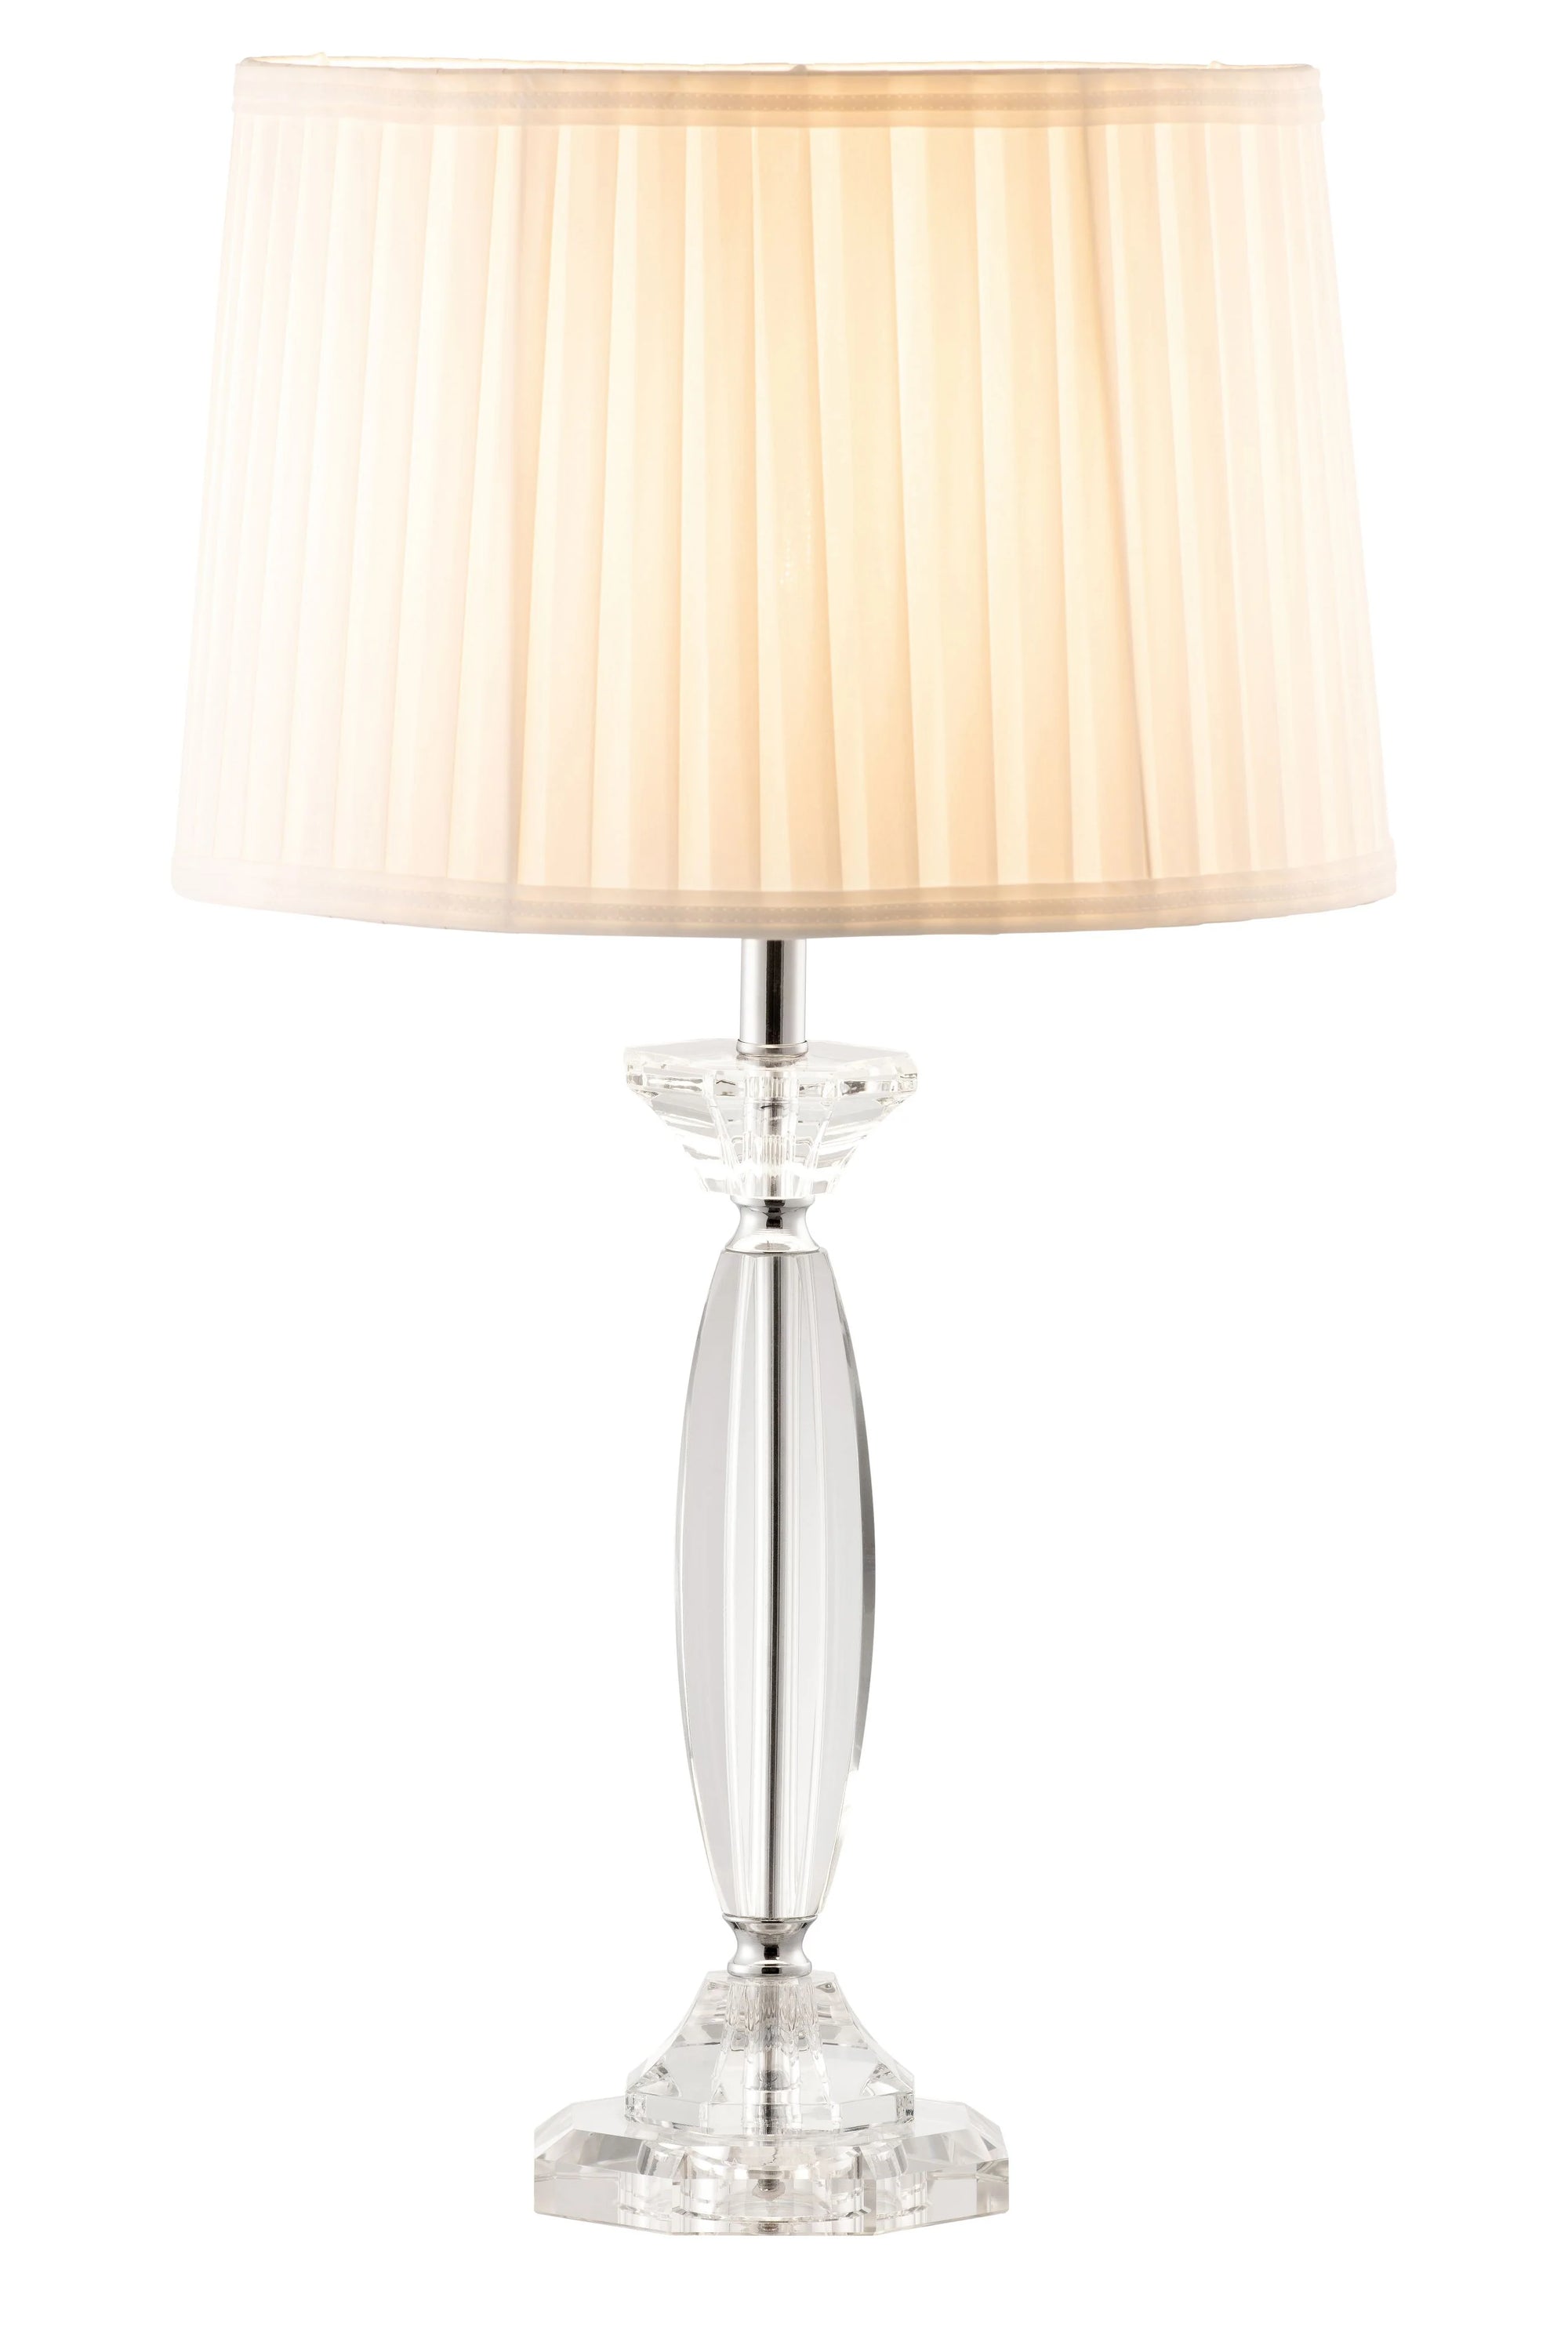 Galway Crystal Large Lyon Lamp and Shade UK FITTINGS